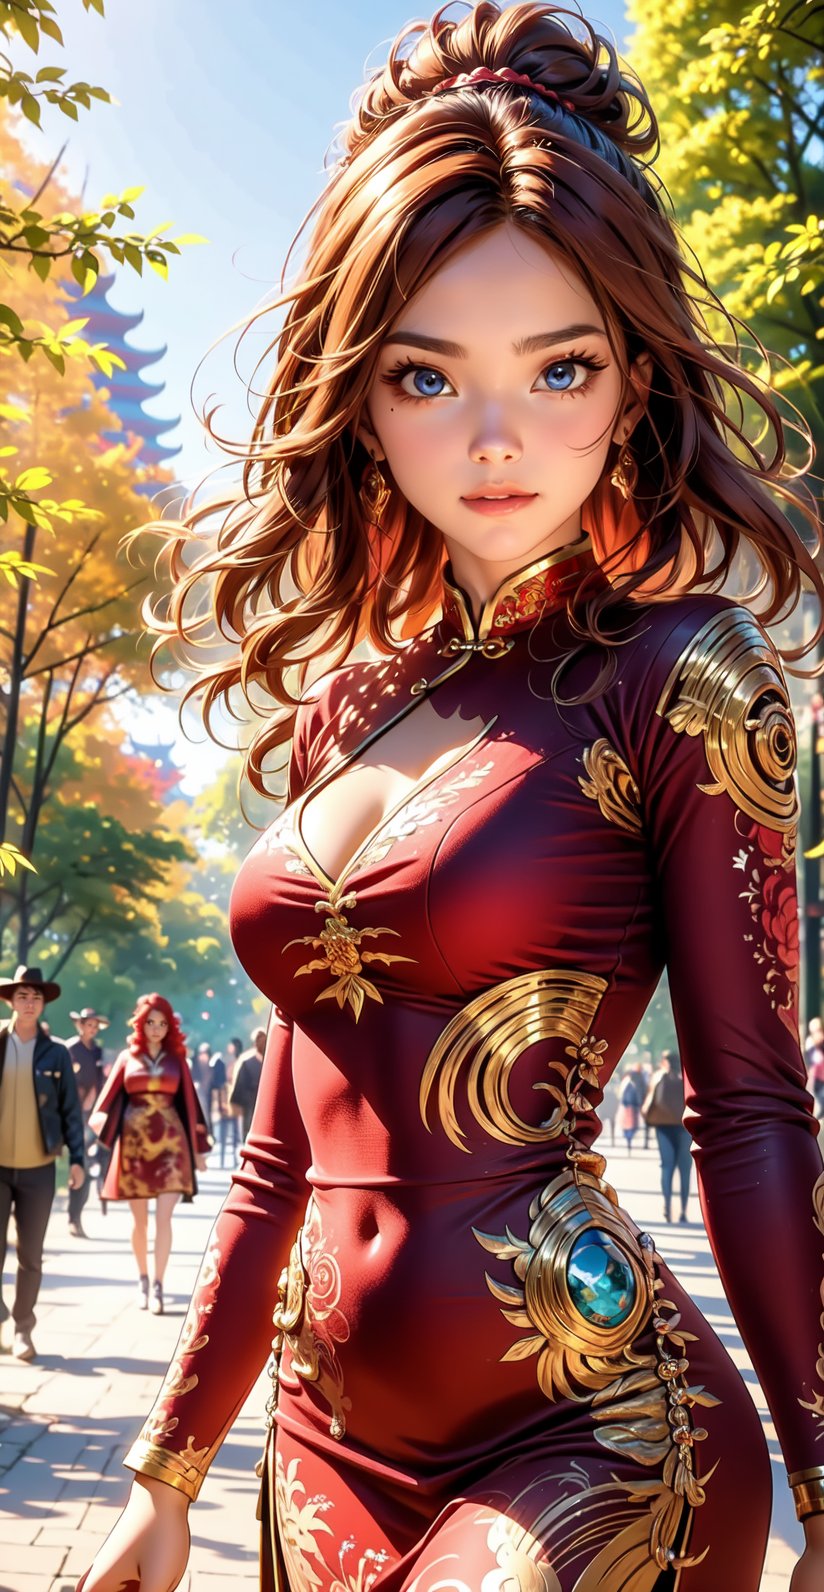 A 25 years old woman in the park, cowboy_shot, A sculptural woman with curly red hair walks through the park in a form-fitting Chinese dress. The warmth in her gaze complements her striking figure, perfectly framed by a beautiful, sunny day. smile, looking away, sun raytracing